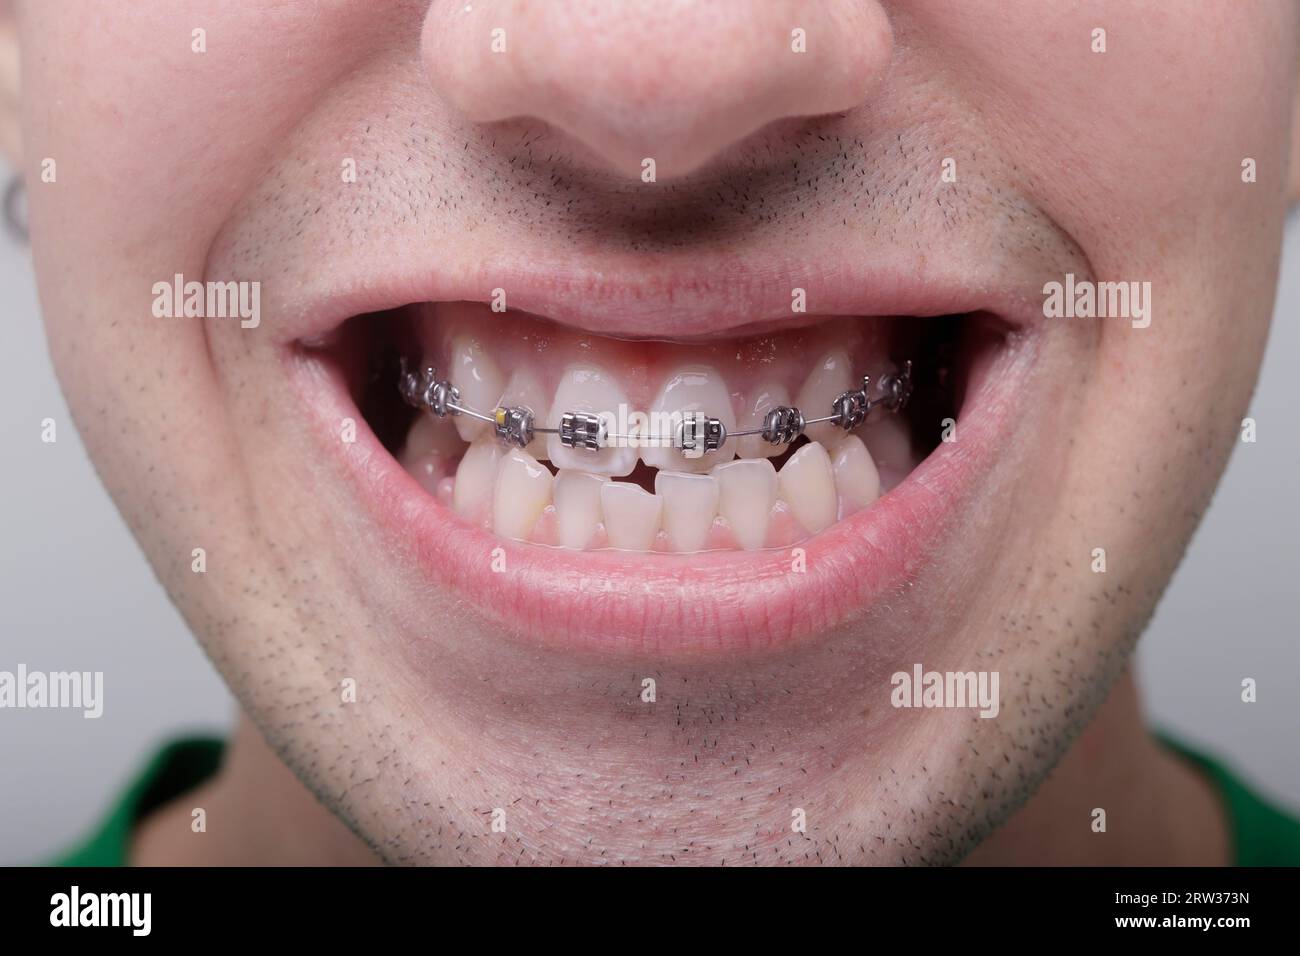 boy's mouth with brackets at the top Stock Photo